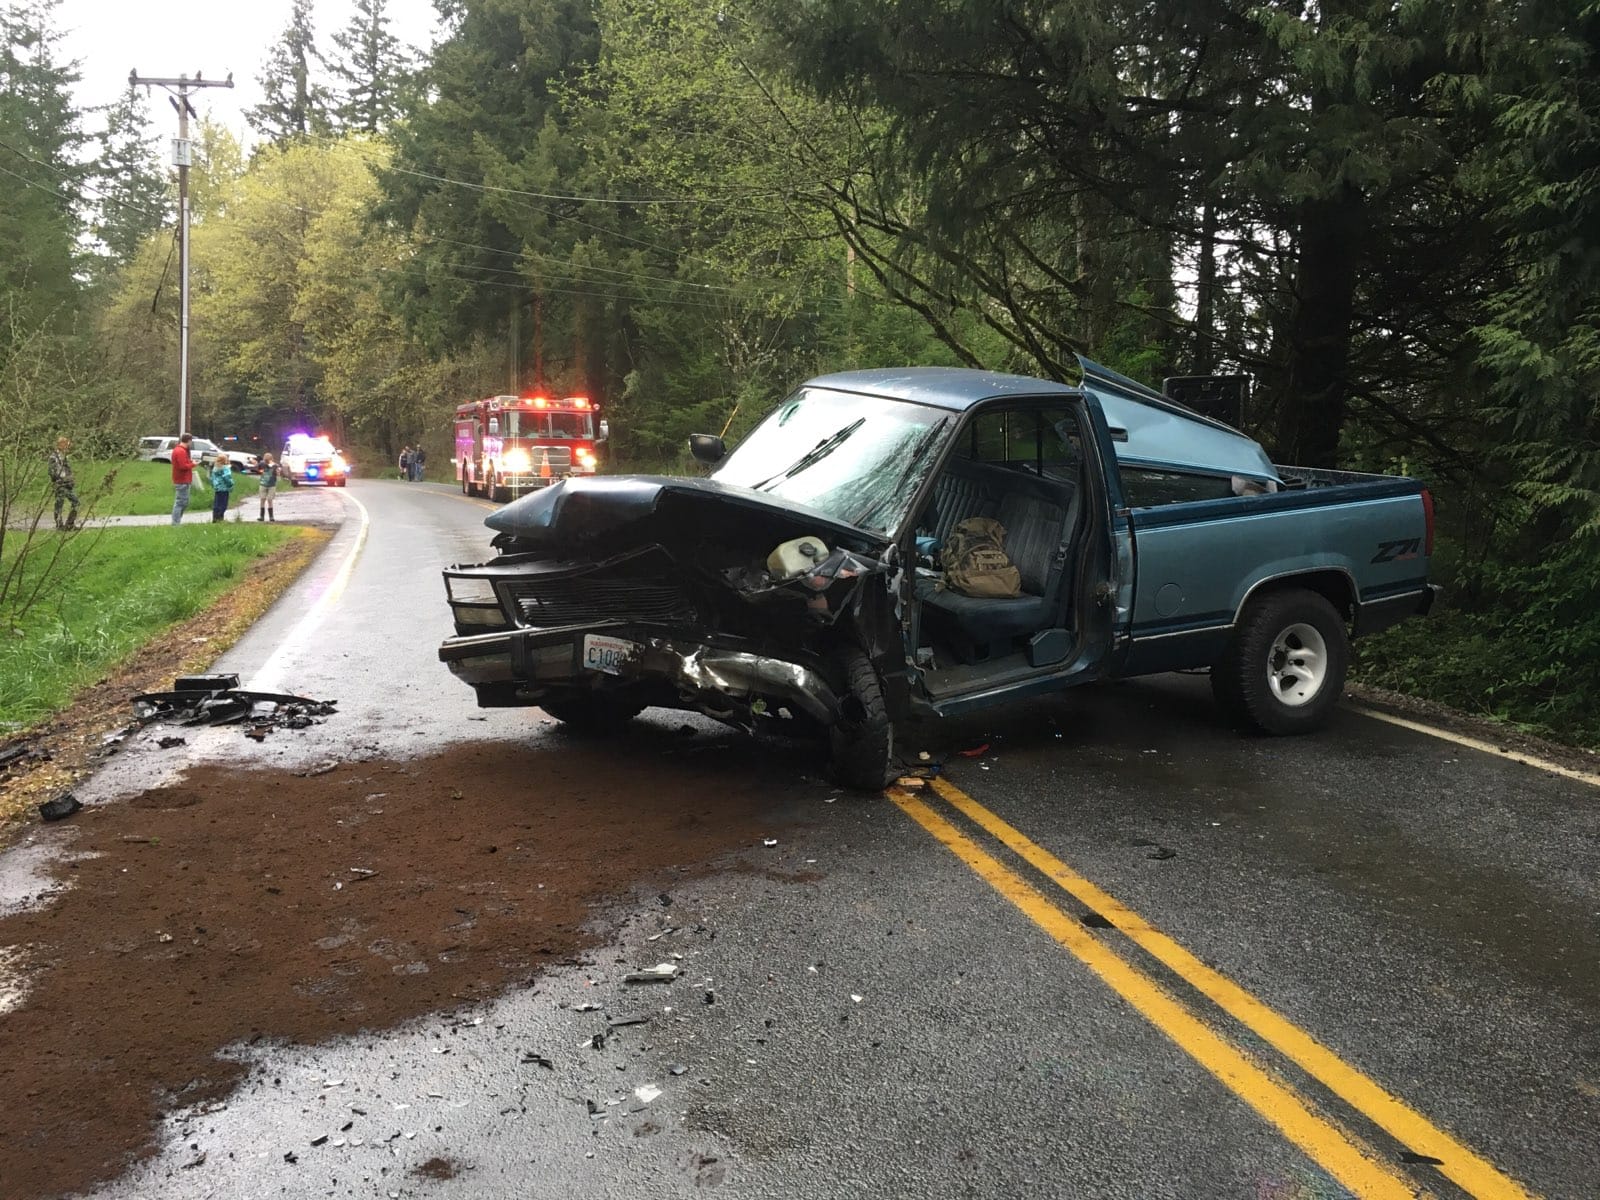 A Clark County Fire & Rescue spokesman provided this photo of a two-vehicle collision on Timmen Road late Friday afternoon. The spokesman said three people were taken to the hospital.